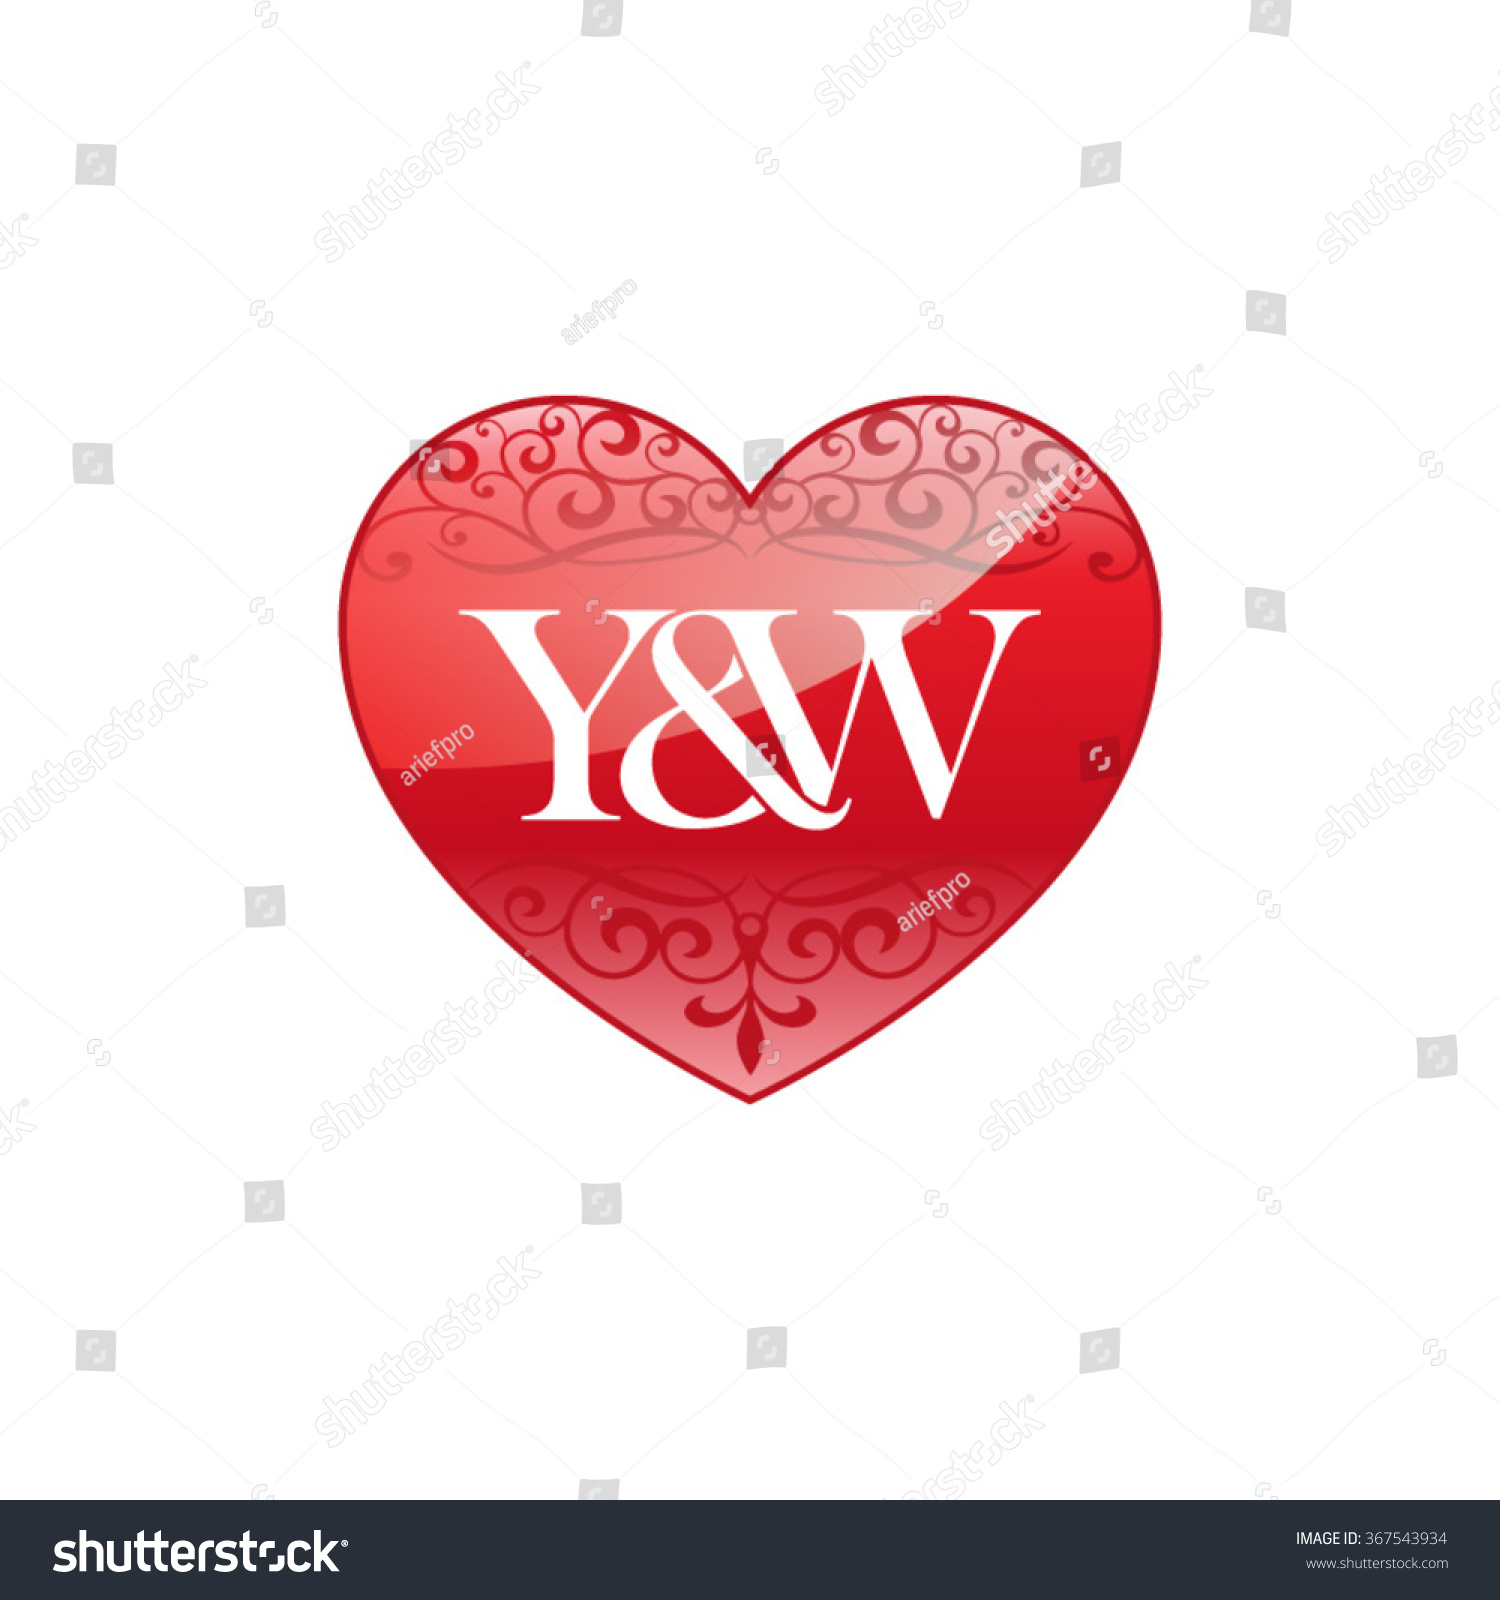 Yw Initial Letter Logo Ornament Heart Stock Vector Royalty Free